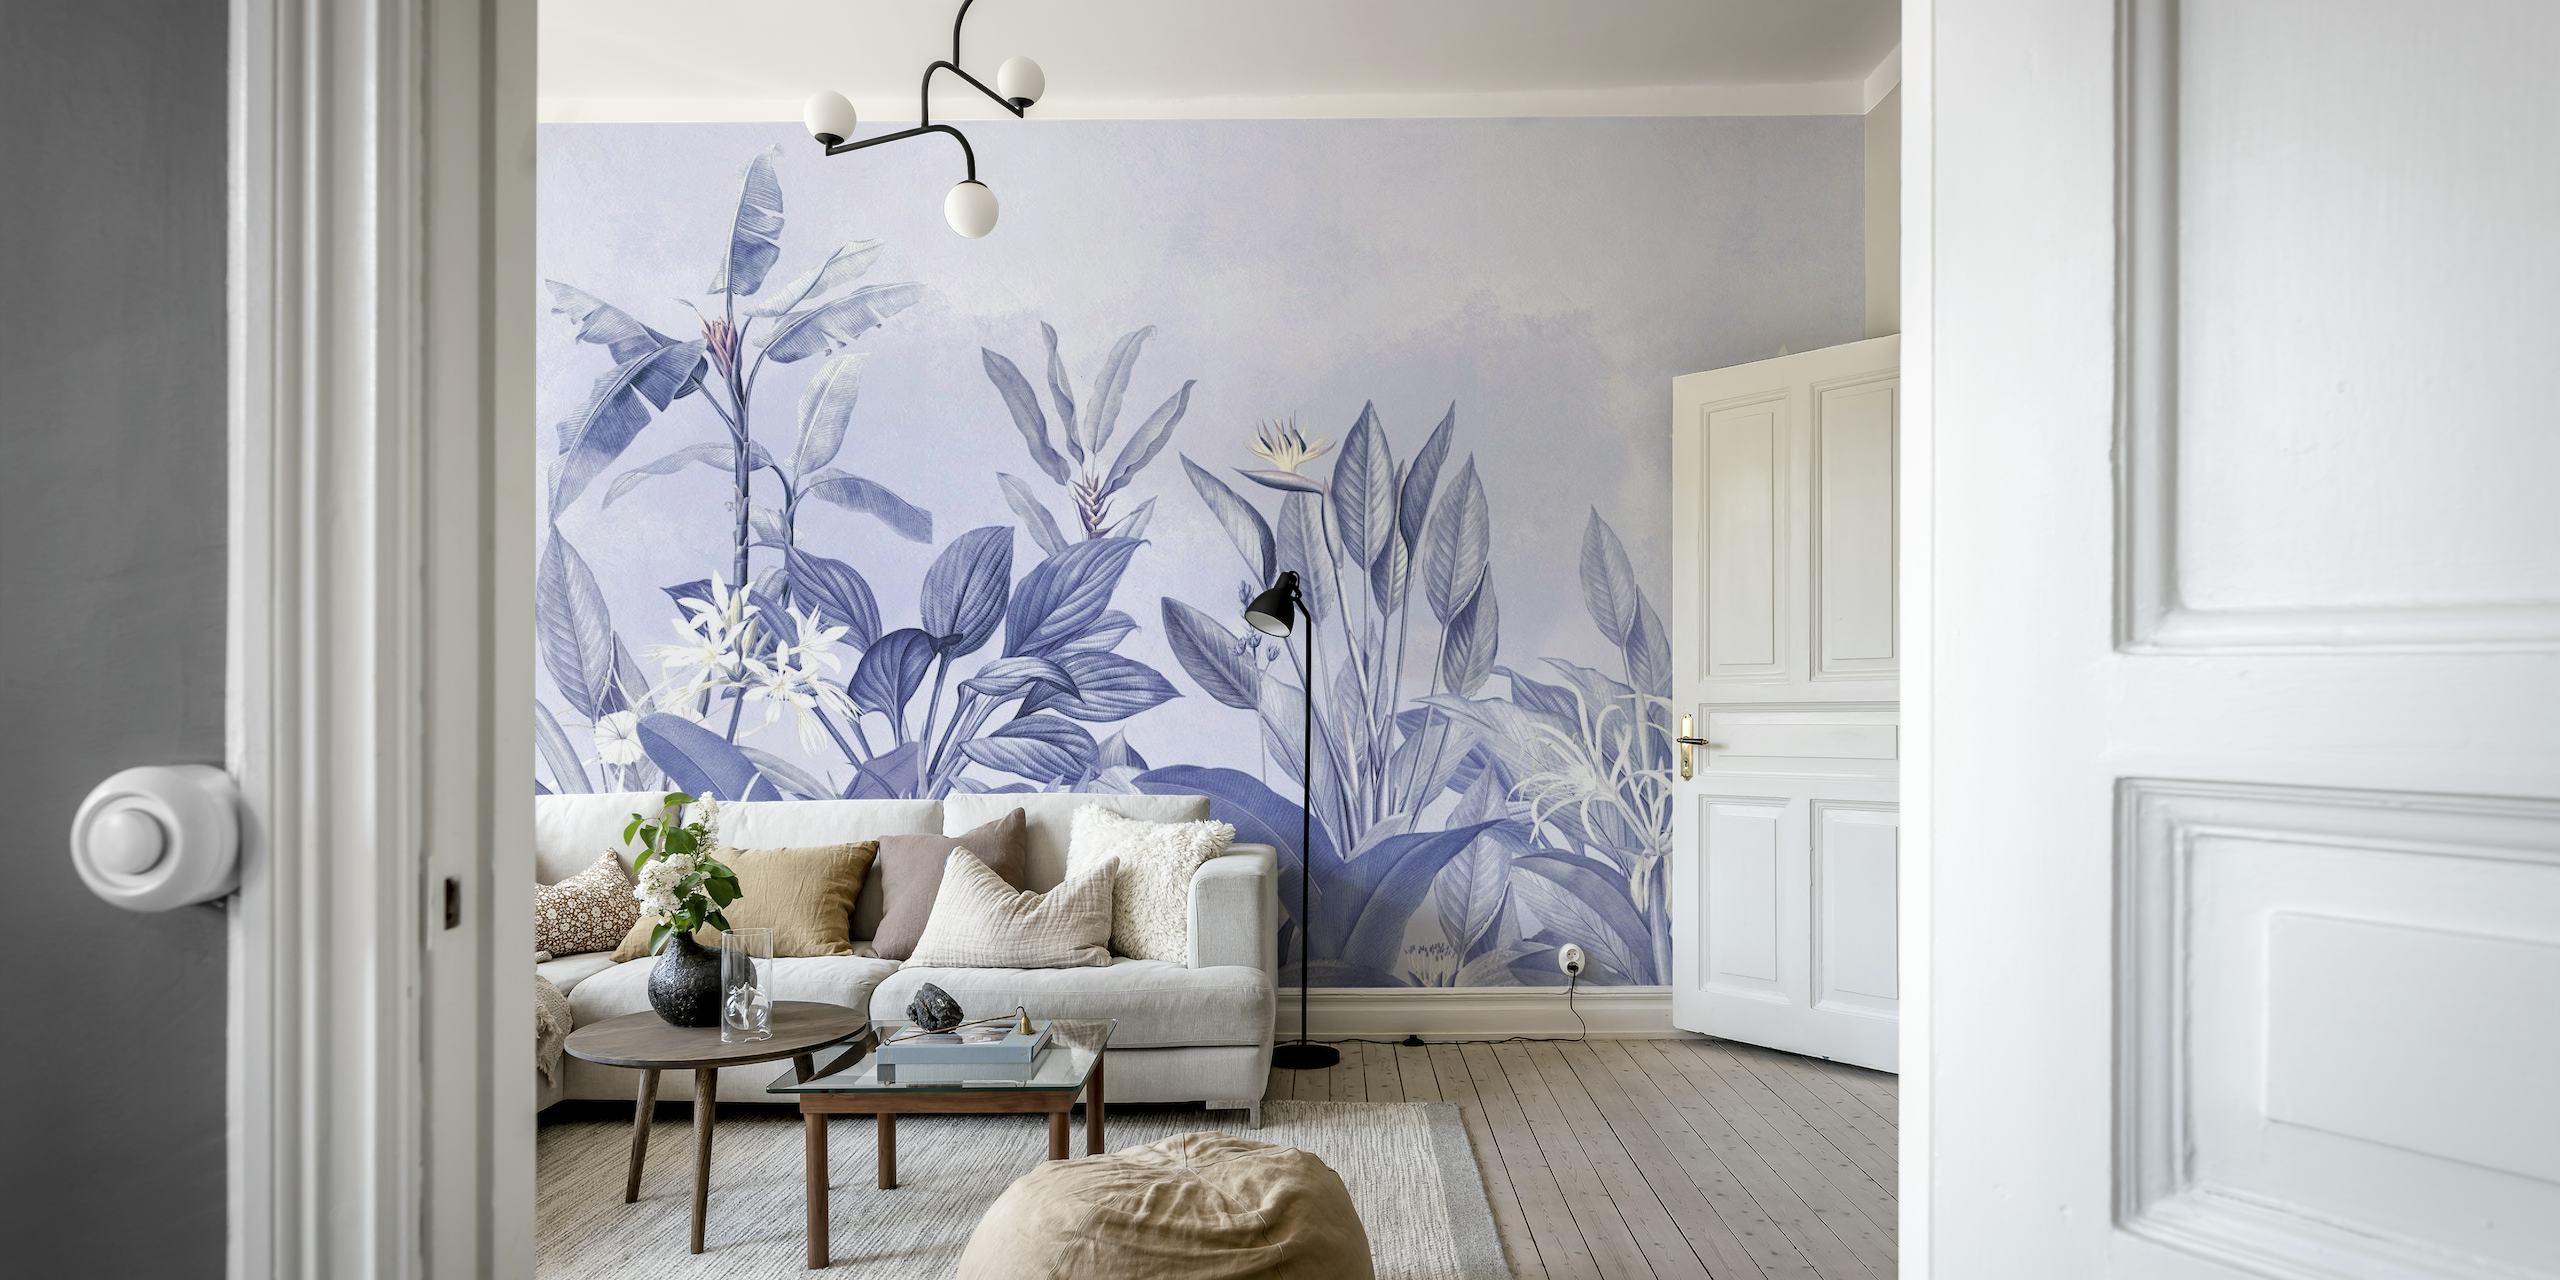 Elegant vintage botanical garden wall mural in shades of blue and white